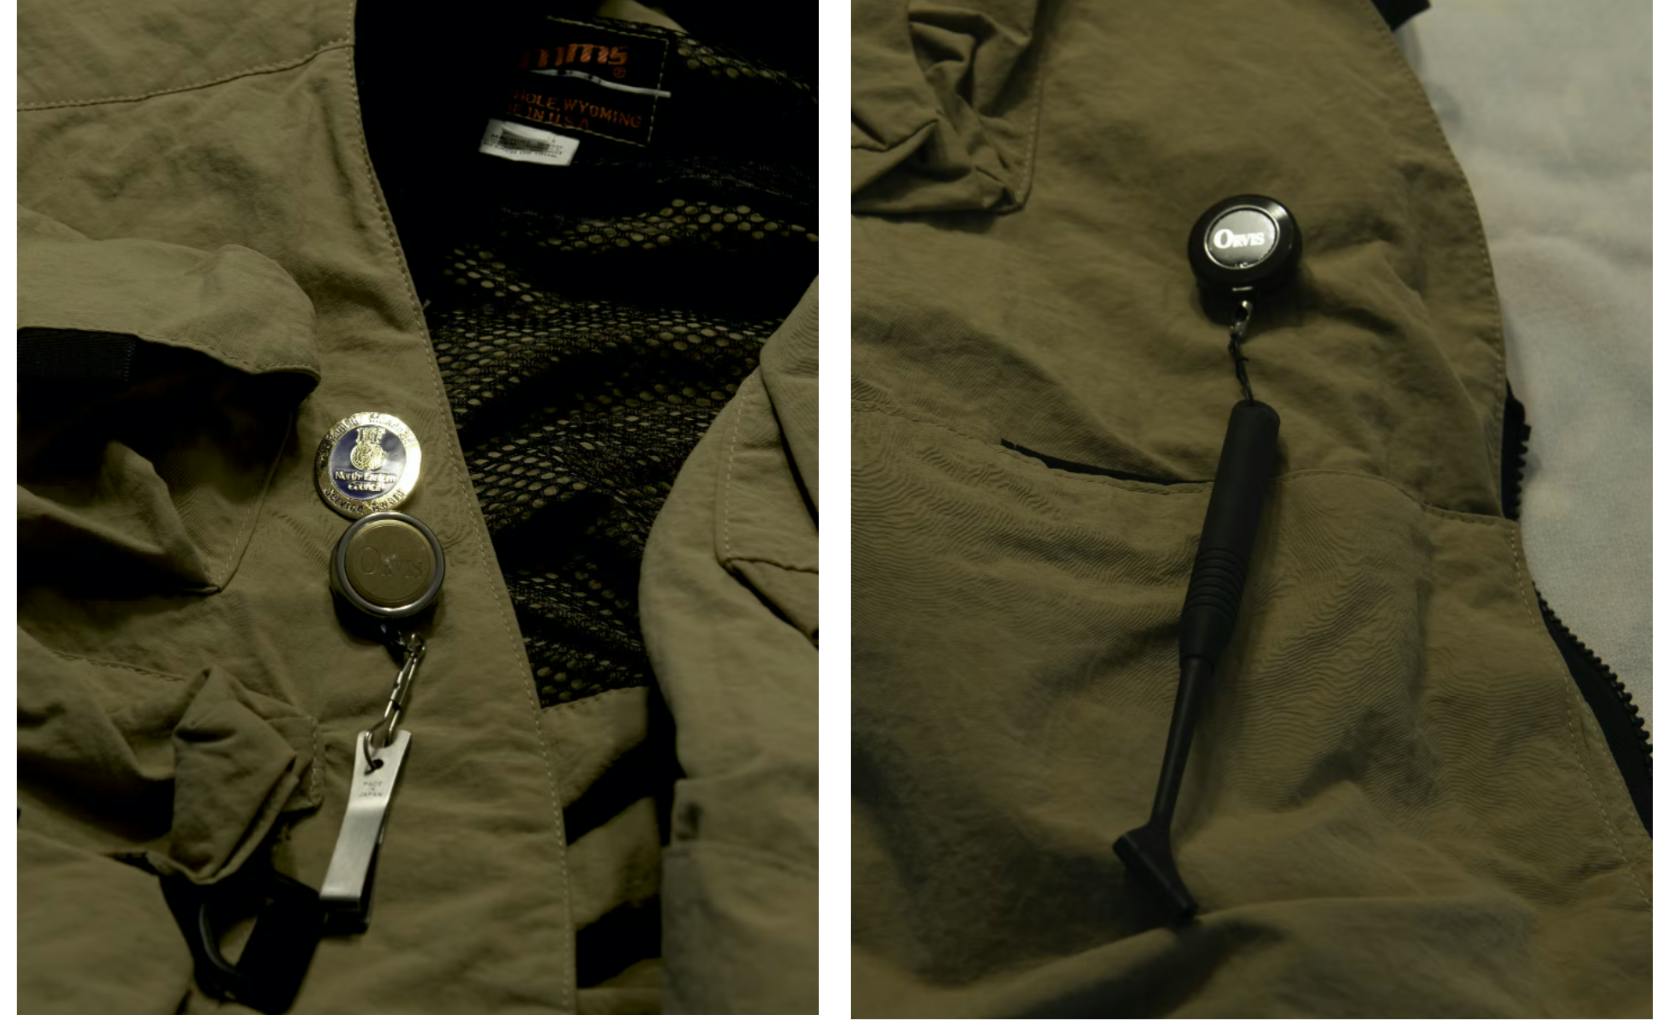 Two photos, on the left is a nipper retract and on the right is a release tool. Both are attached to fishing vests.